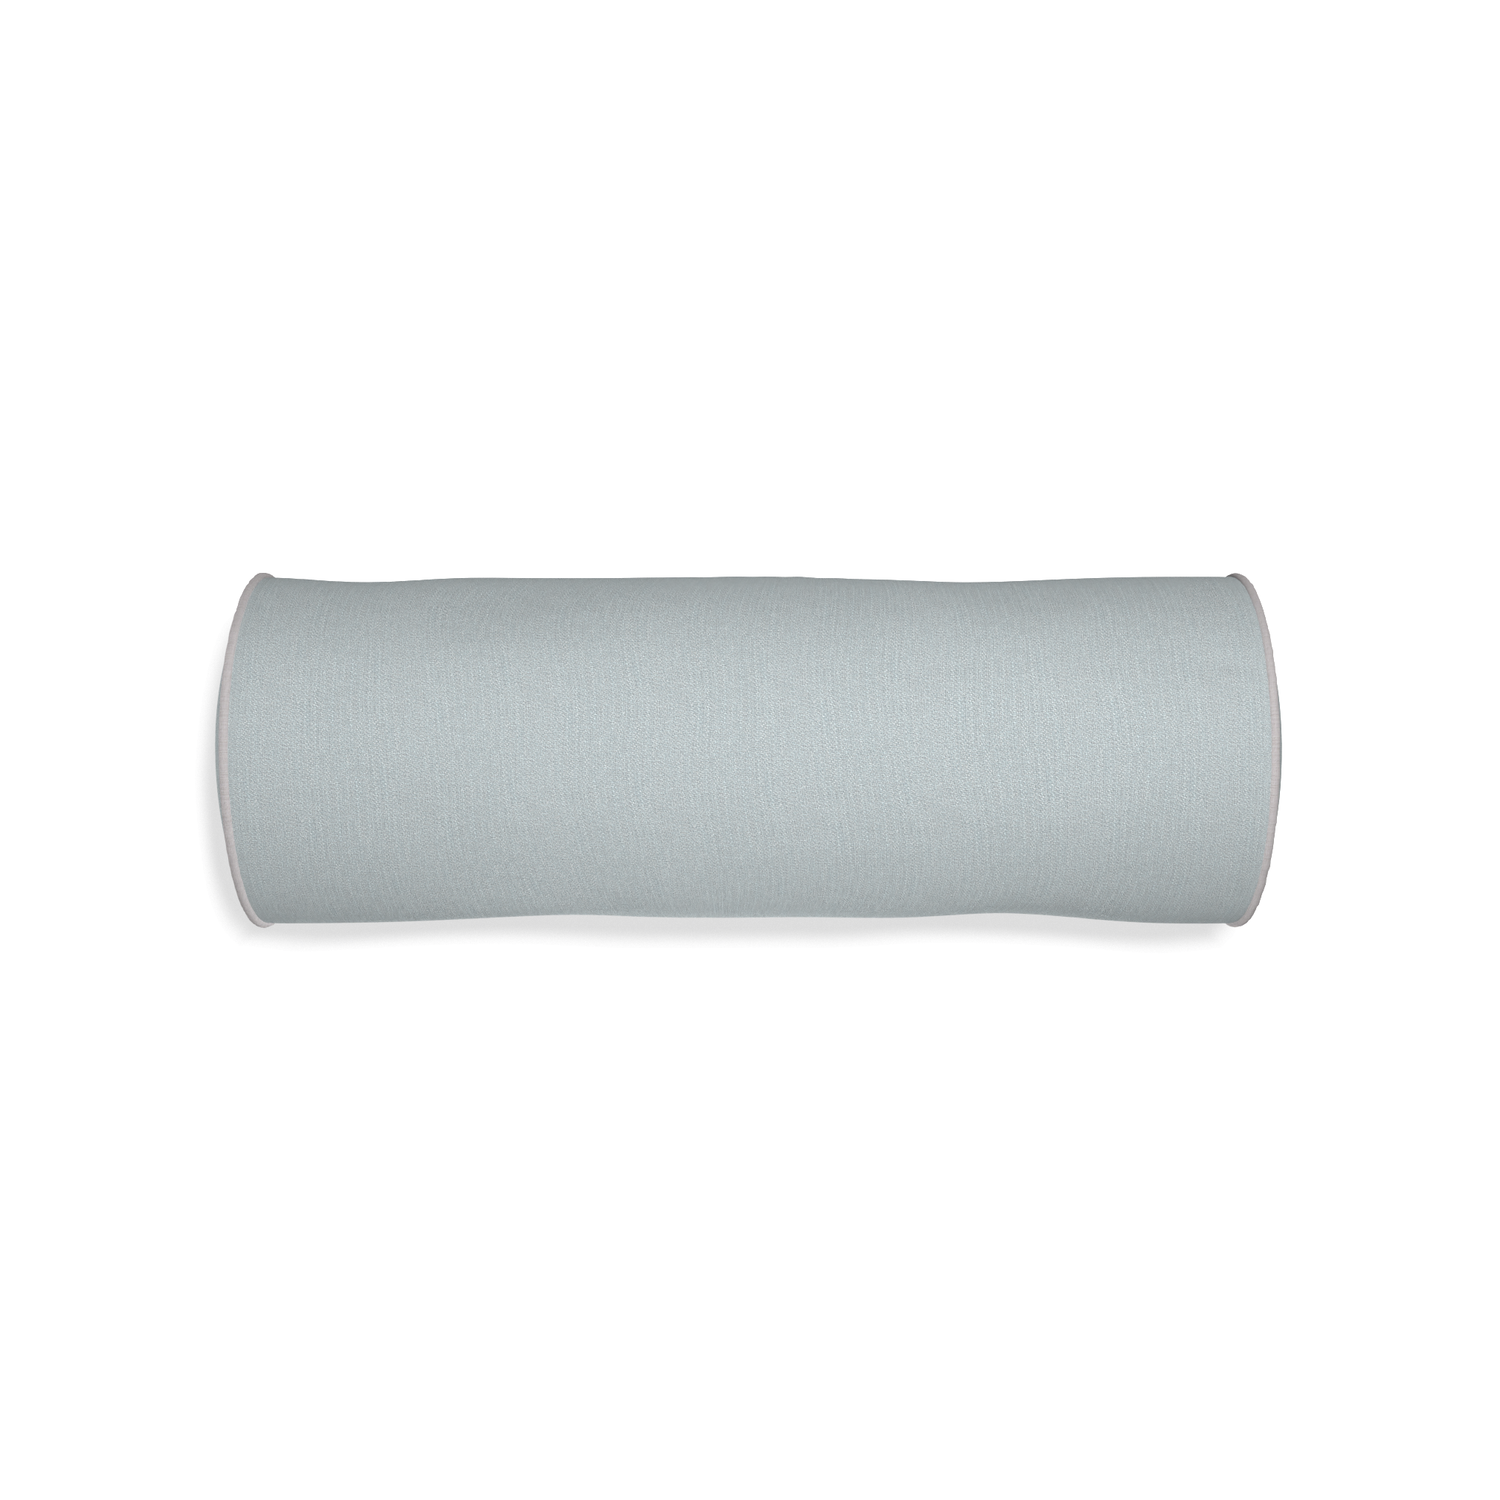 Bolster sea custom grey bluepillow with pebble piping on white background